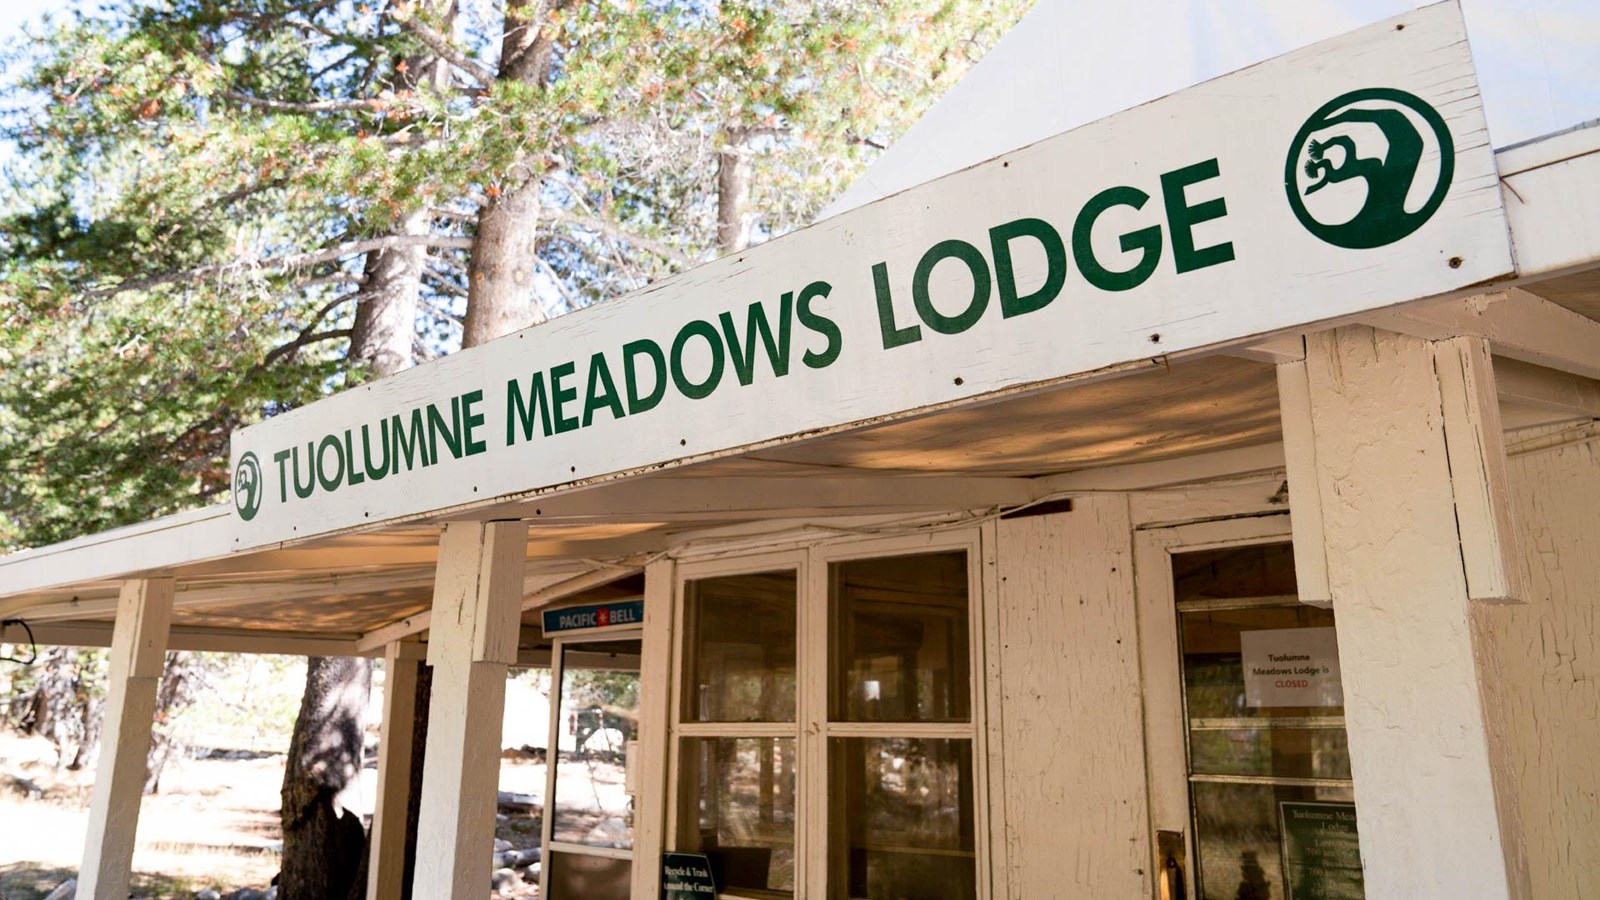 Entrance and sign for Tuolumne Meadows Lodge